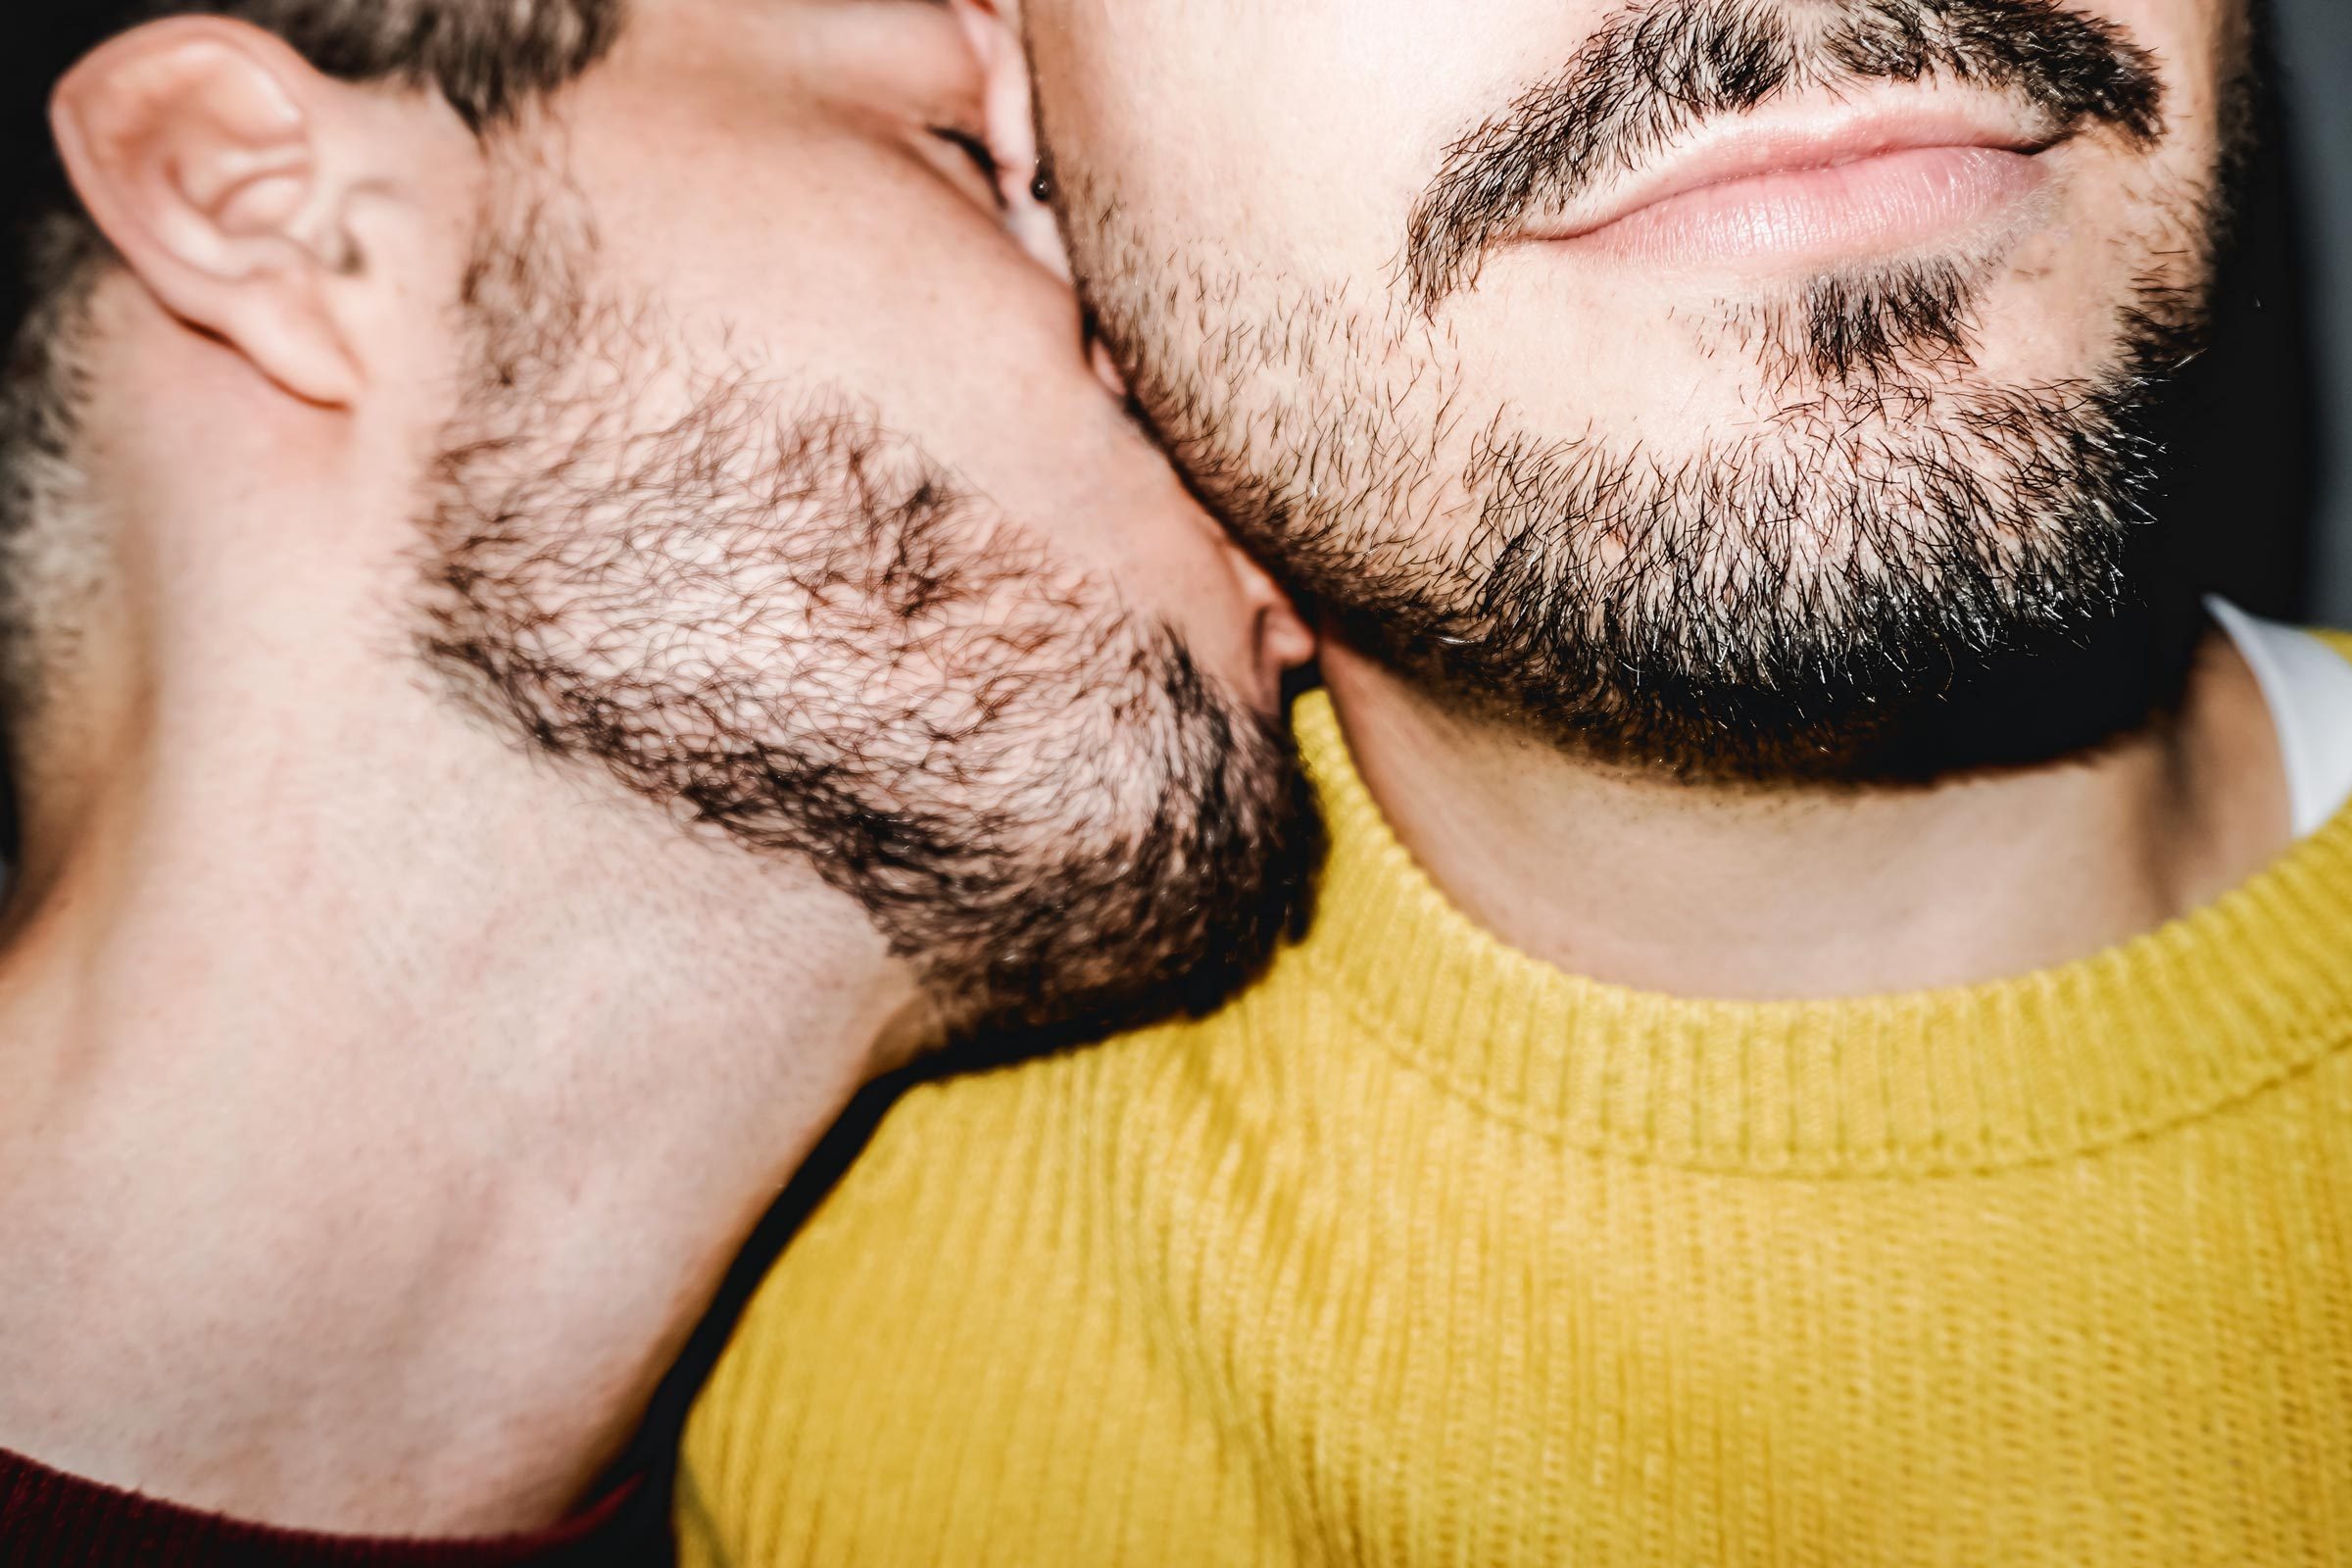 man kissing another man's neck